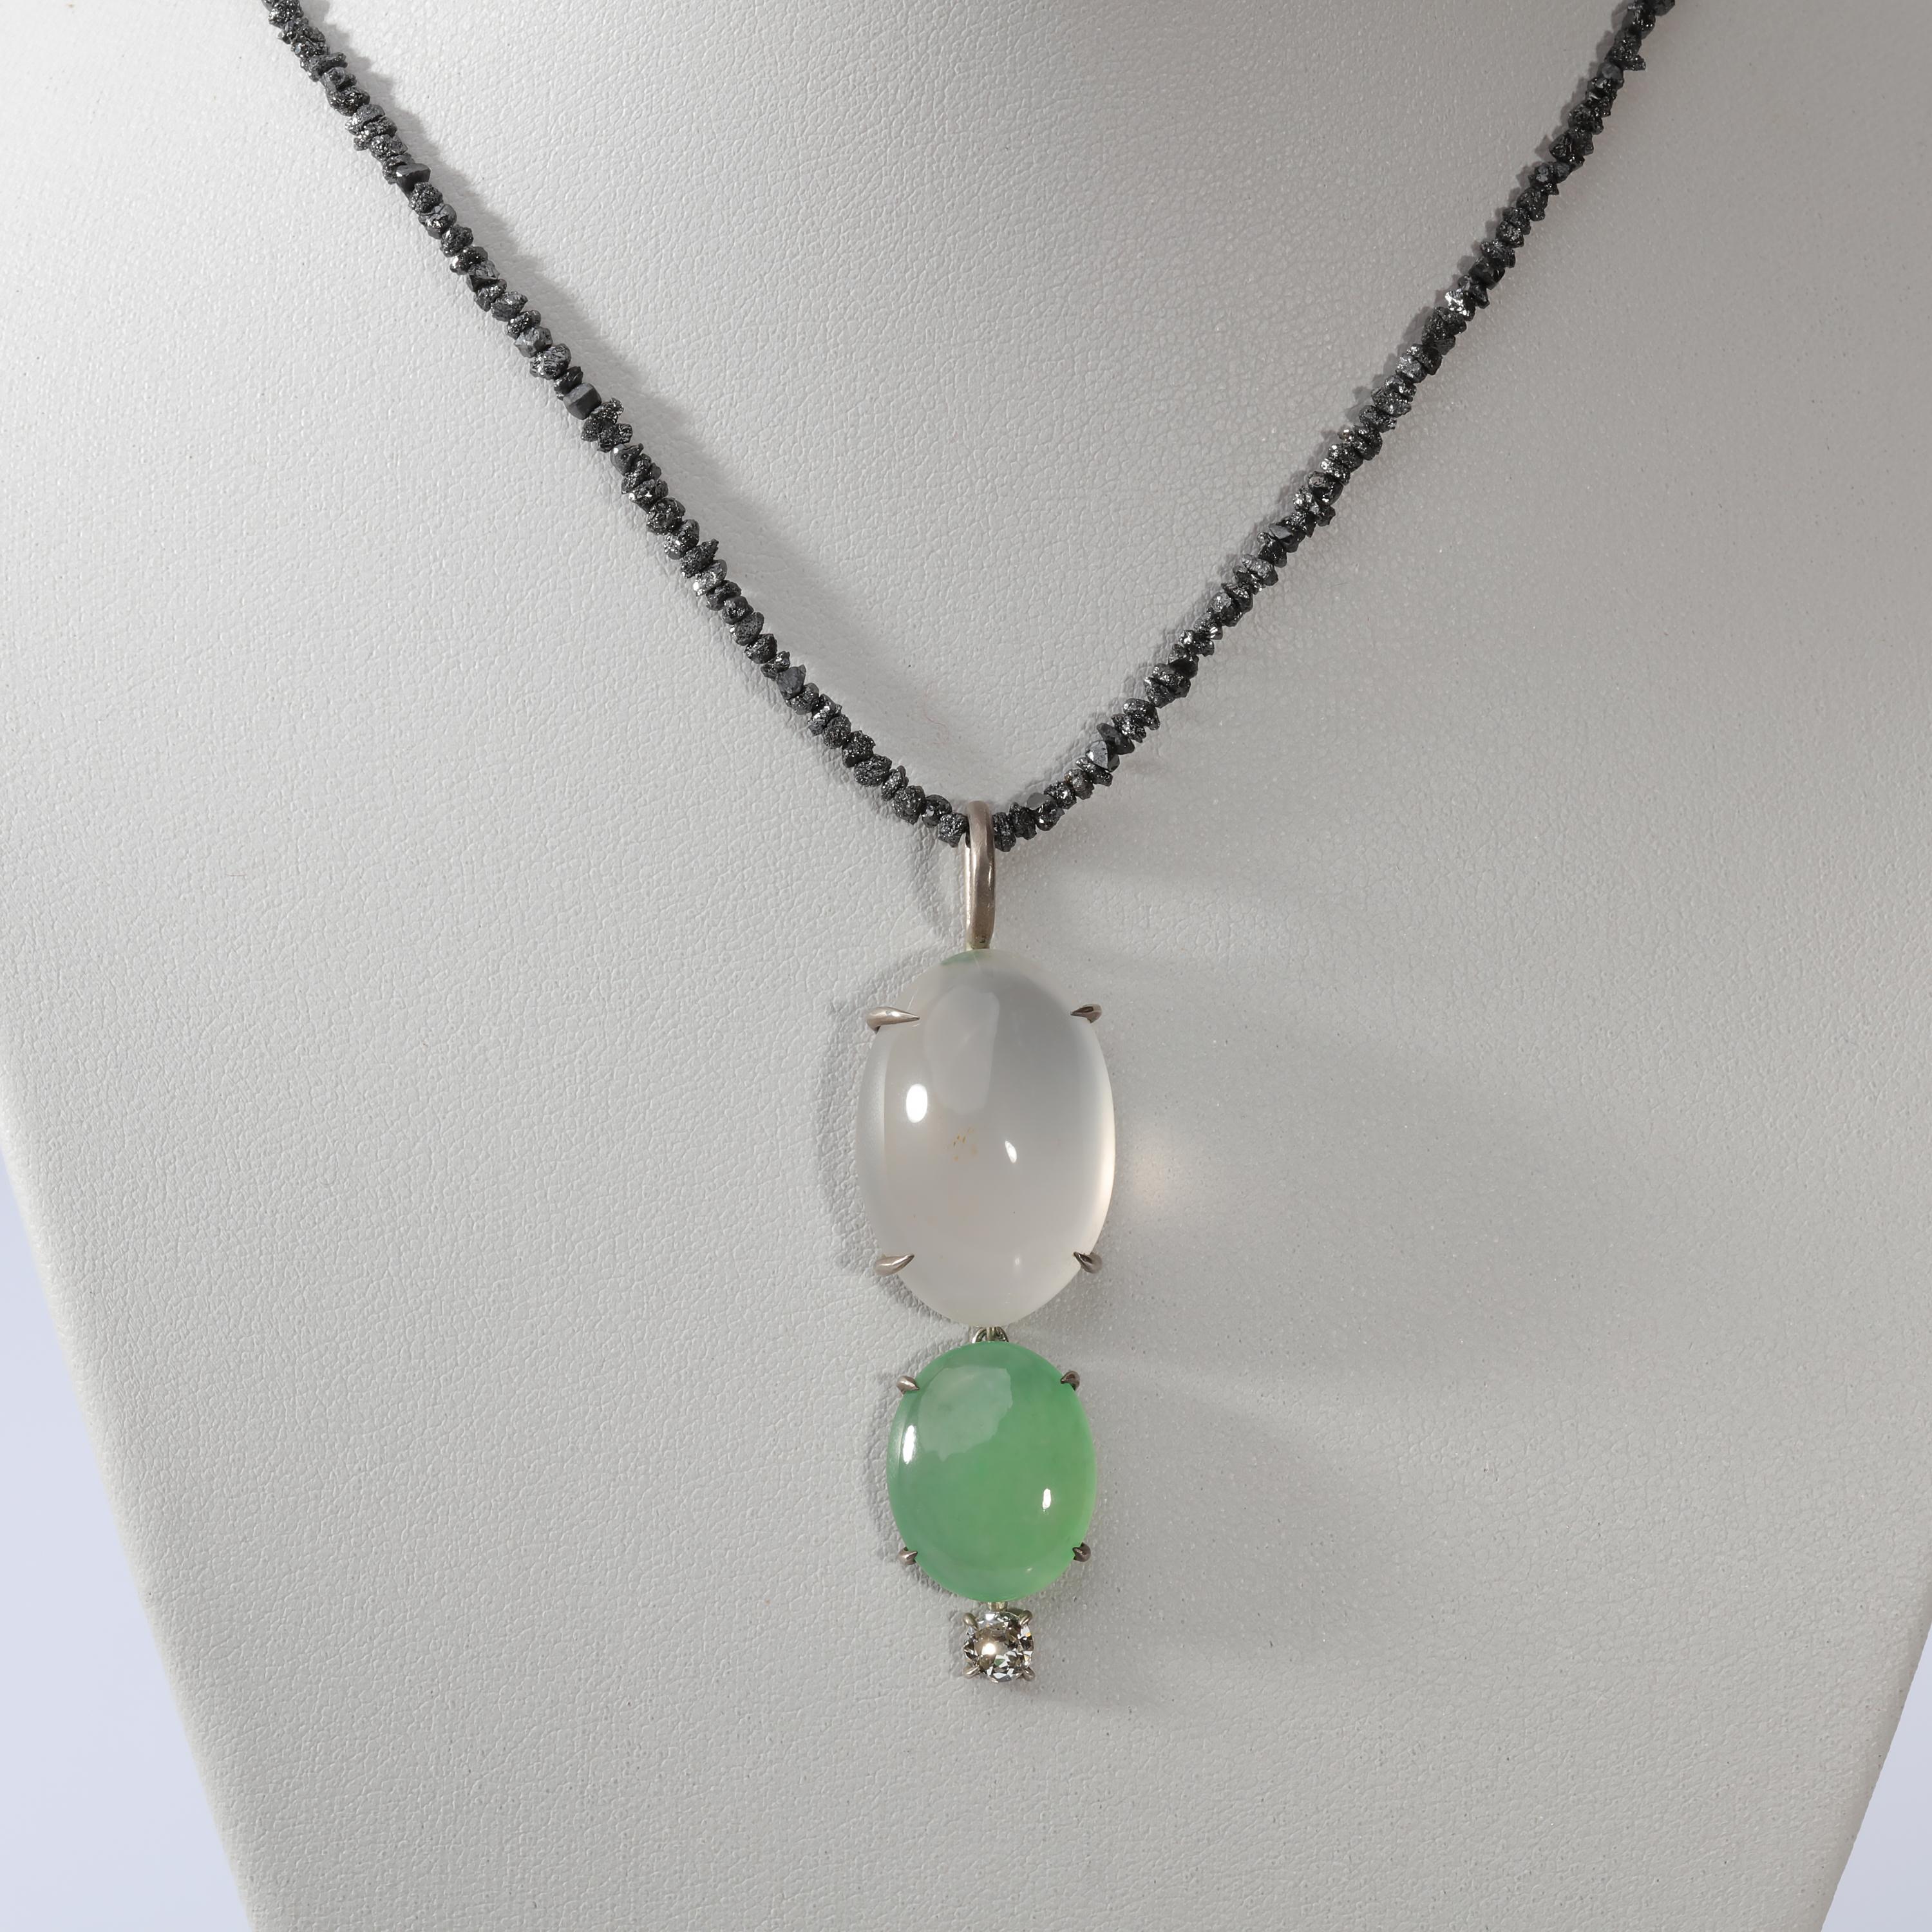 This jade, diamond, and quartz pendant is a study in translucency. The 25.5mm x 17.5mm oval natural quartz cabochon at the top is semi-transparent and glows like partially melted ice. Hanging freely from the mounting that holds the quartz is a